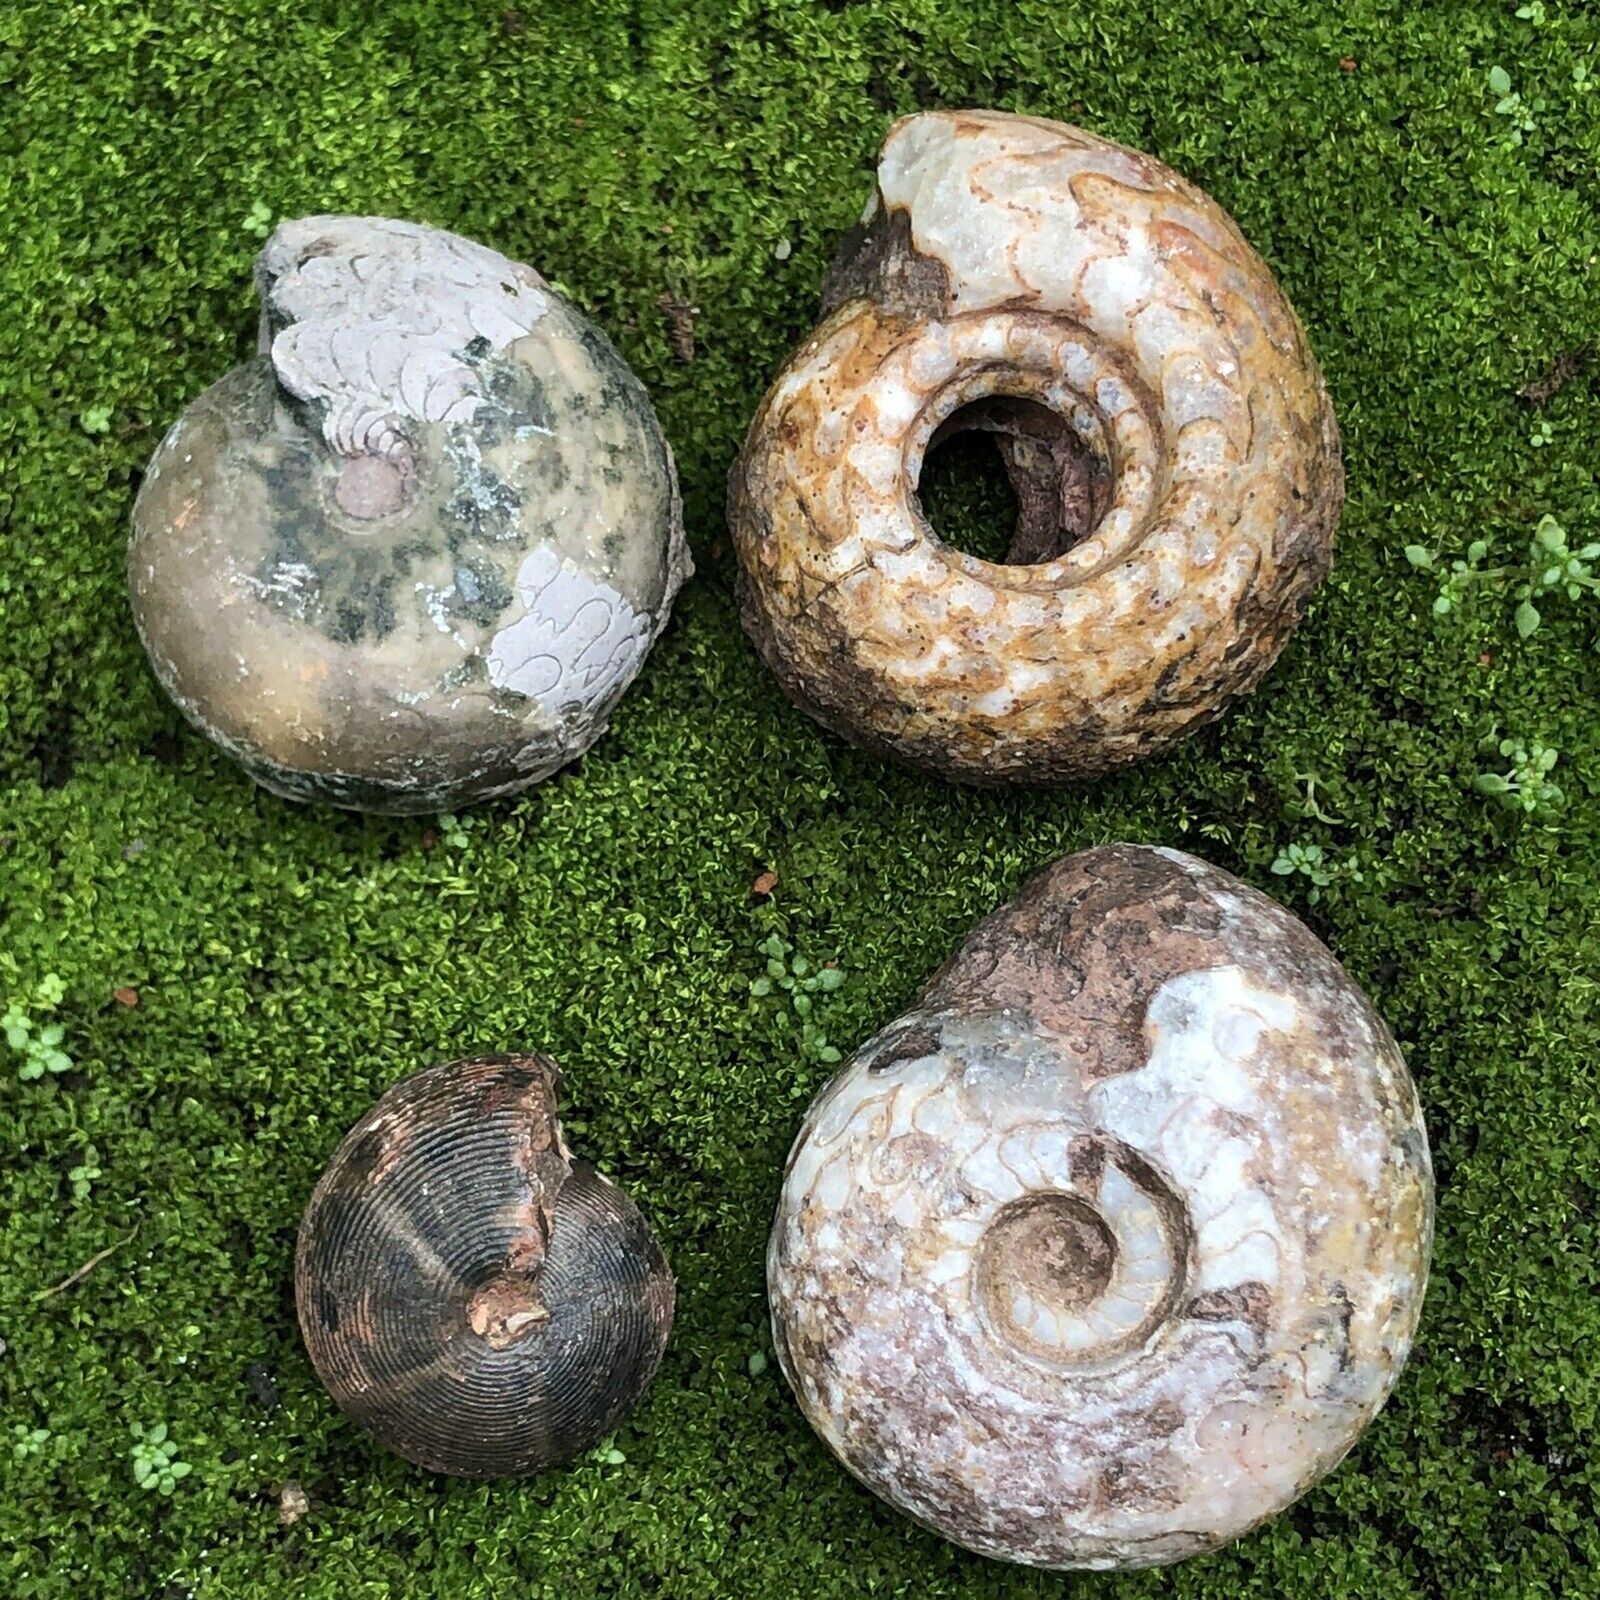 4 pcs Mixed Packages of AMMONITE FROM THE DEMOCRATIC REPUBLIC OF TIMOR LESTE